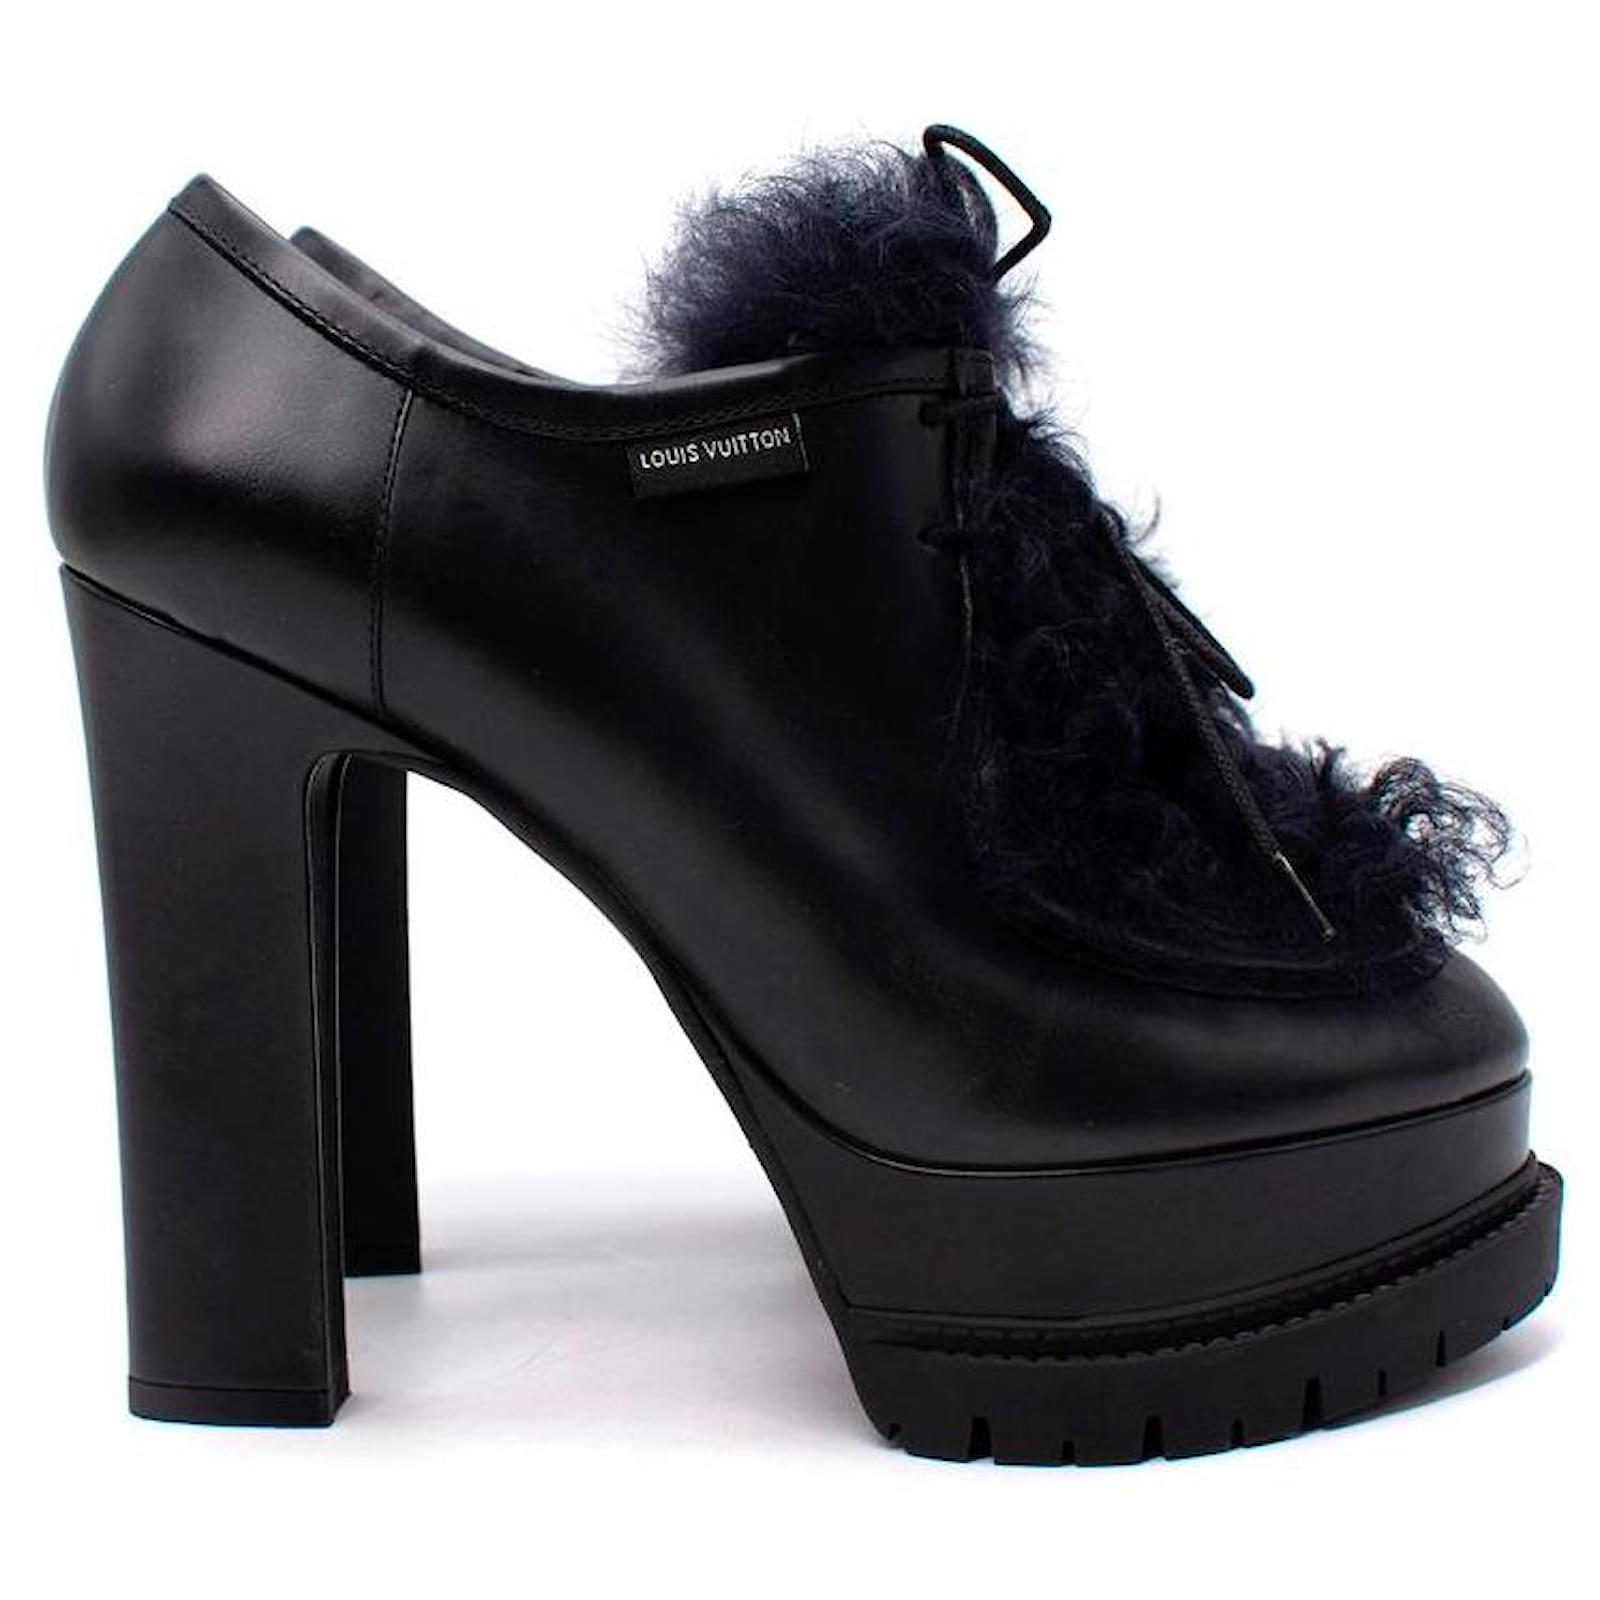 Louis Vuitton - Shearling Leather Lace Up Heel Ankle Boots Black